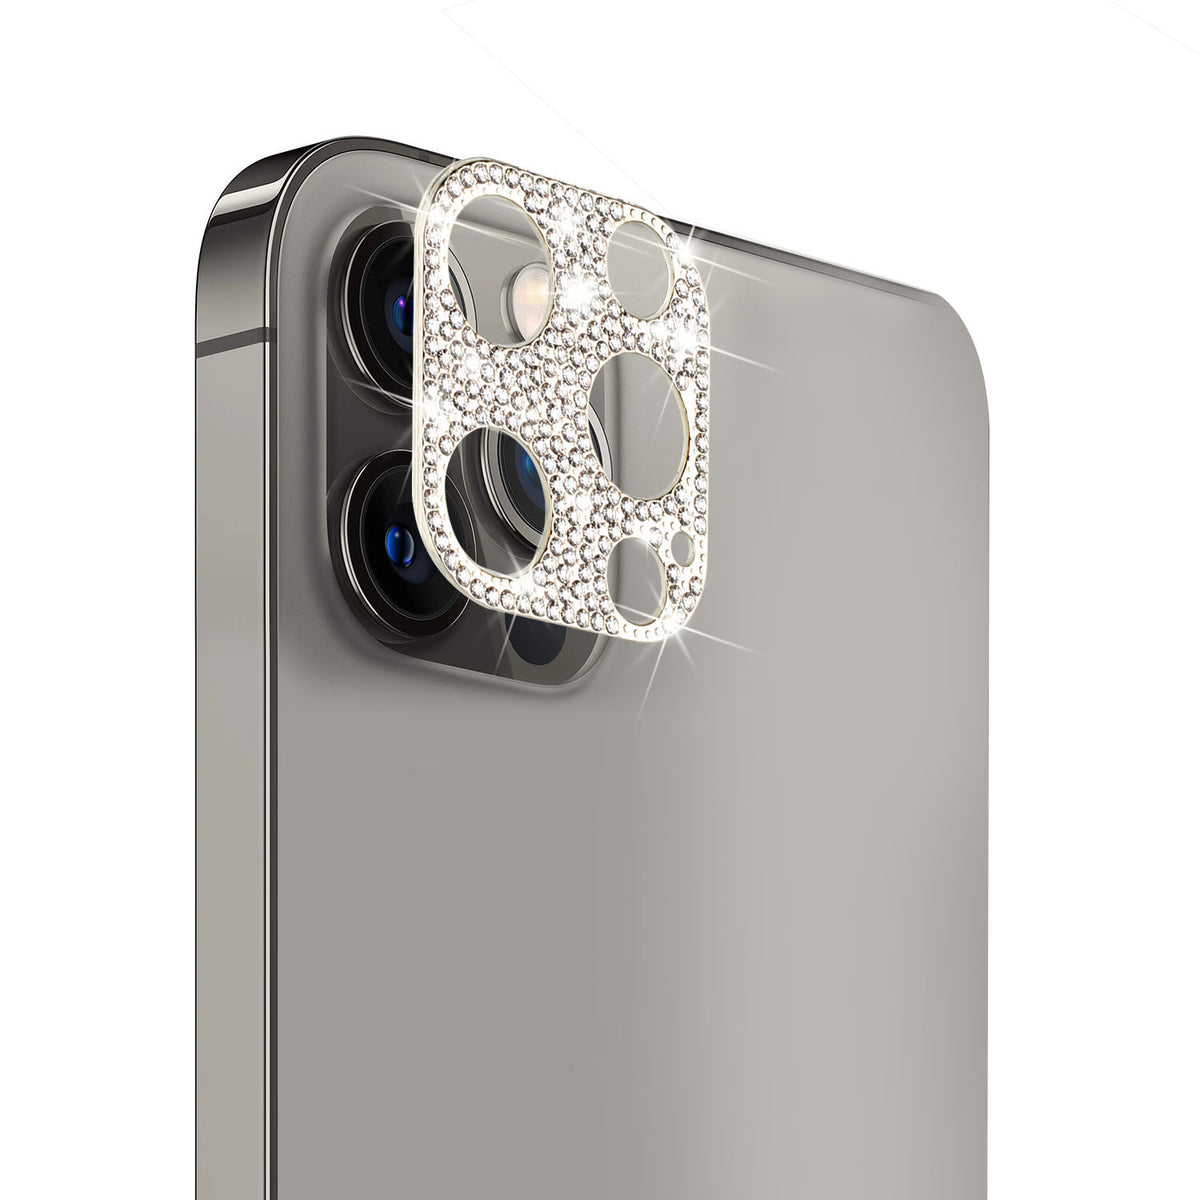 Iphone 11 ( 6.1 Inch) Back Camera Lens Cover Diamond Silver